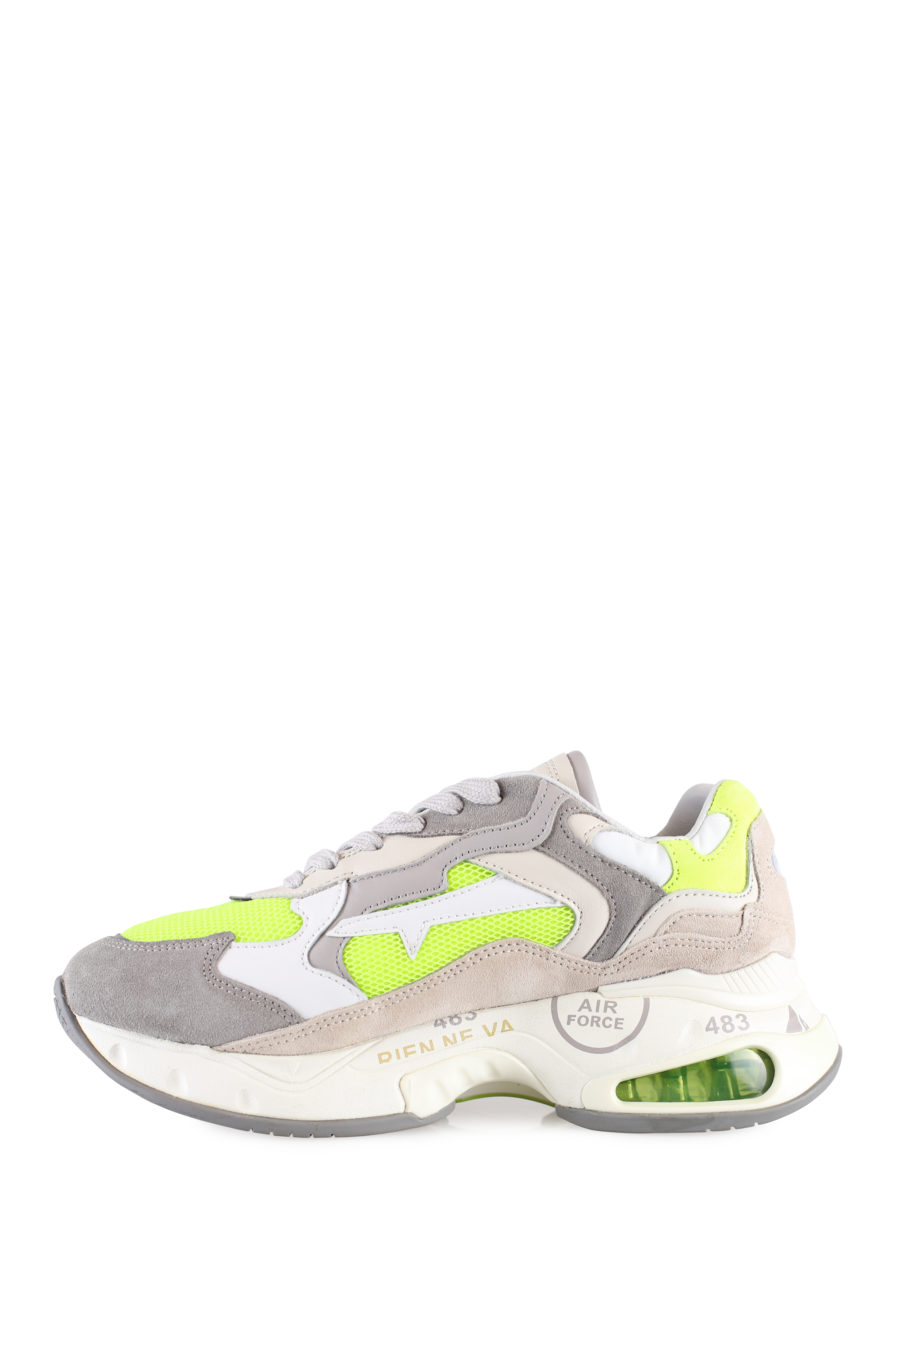 Grey and neon yellow trainers with platform "Sharkyd" - IMG 1810